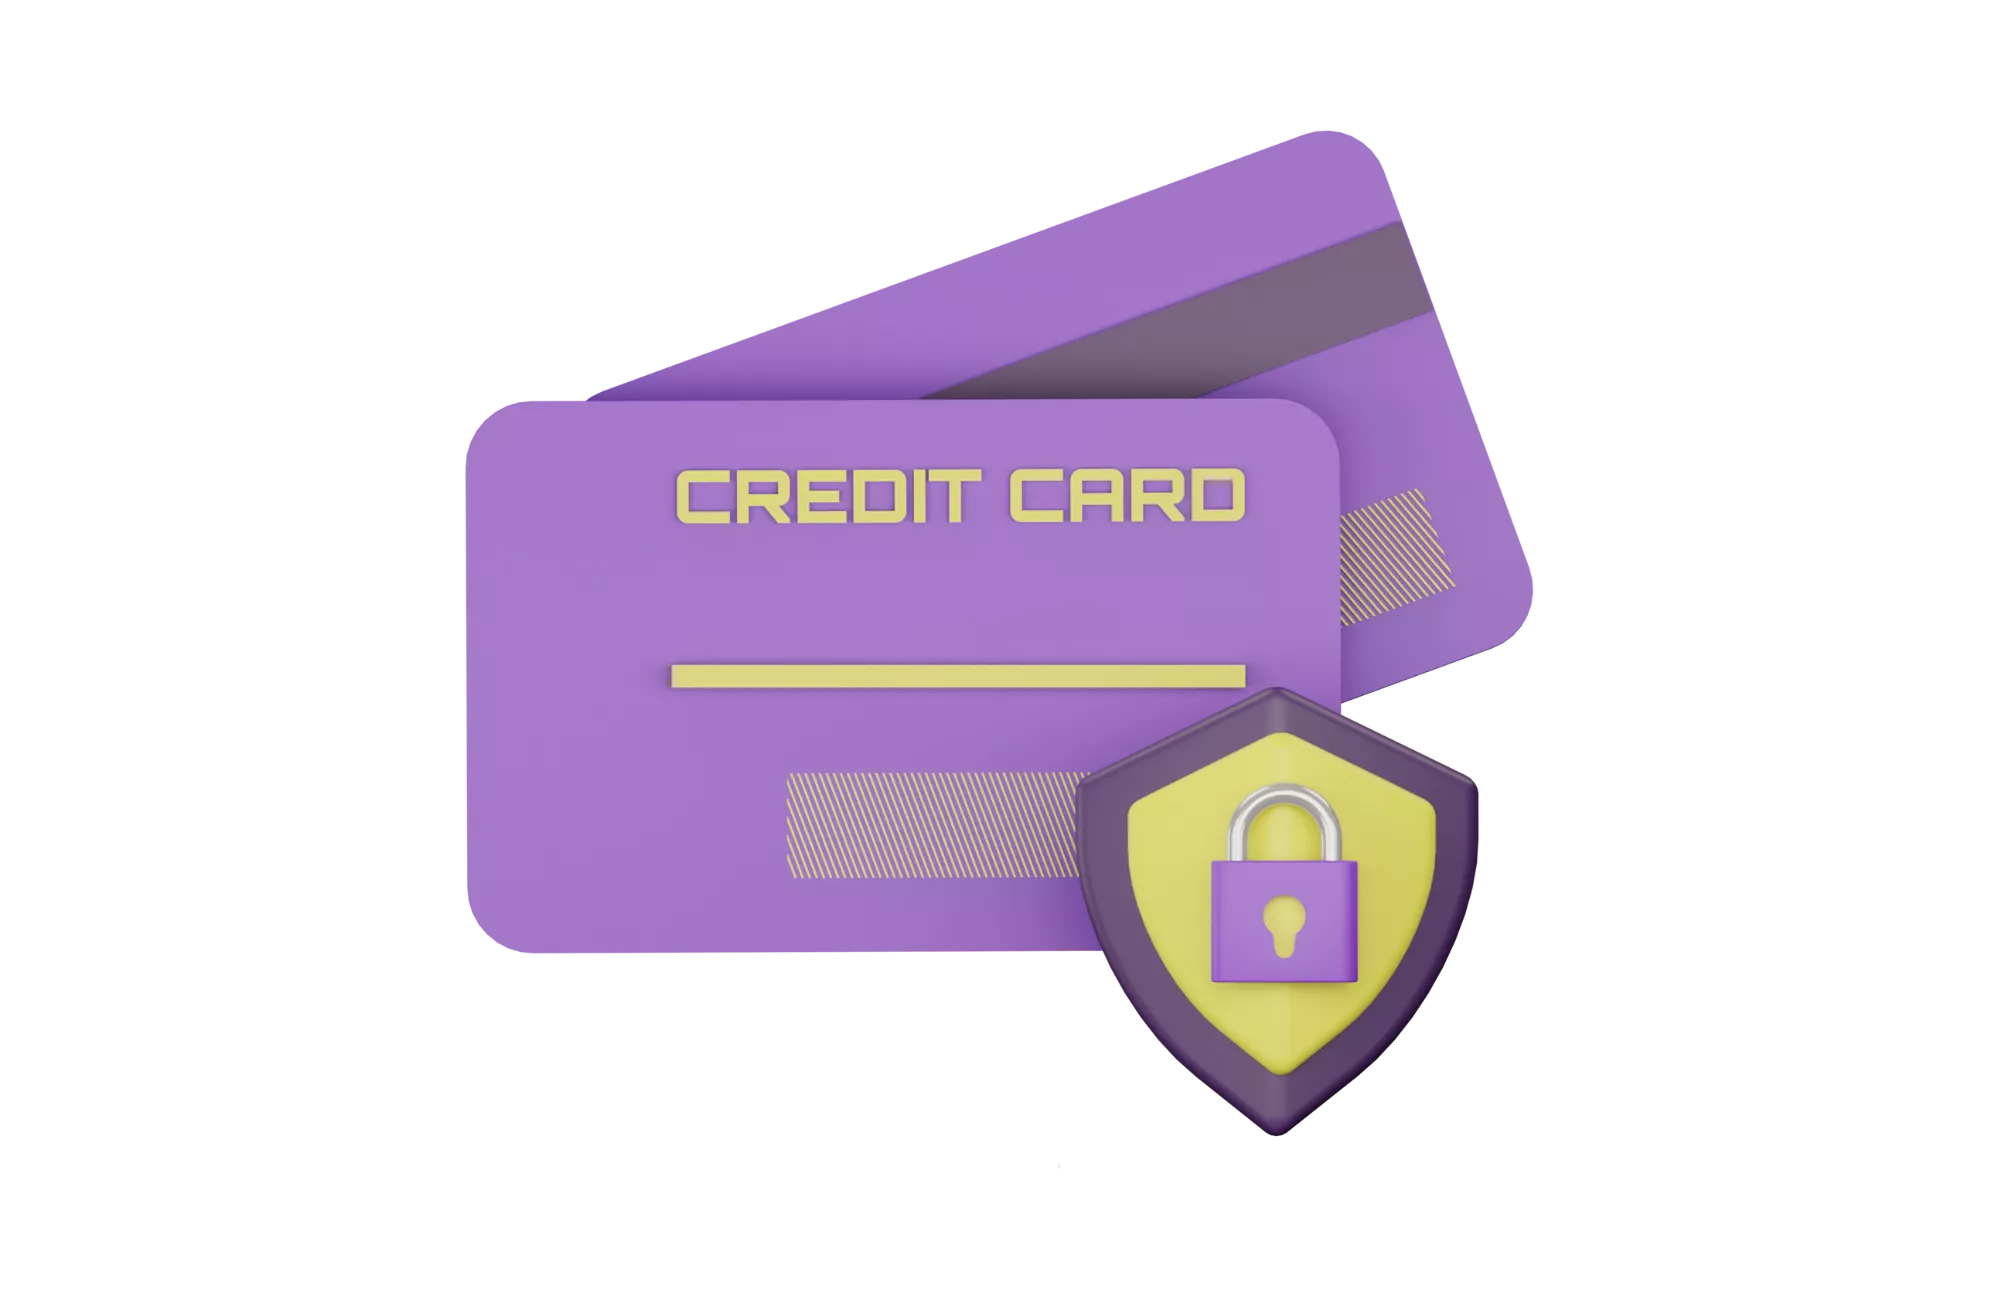 a couple of purple credit cards that can be used for card-not-present transactions via high-risk payment gateways